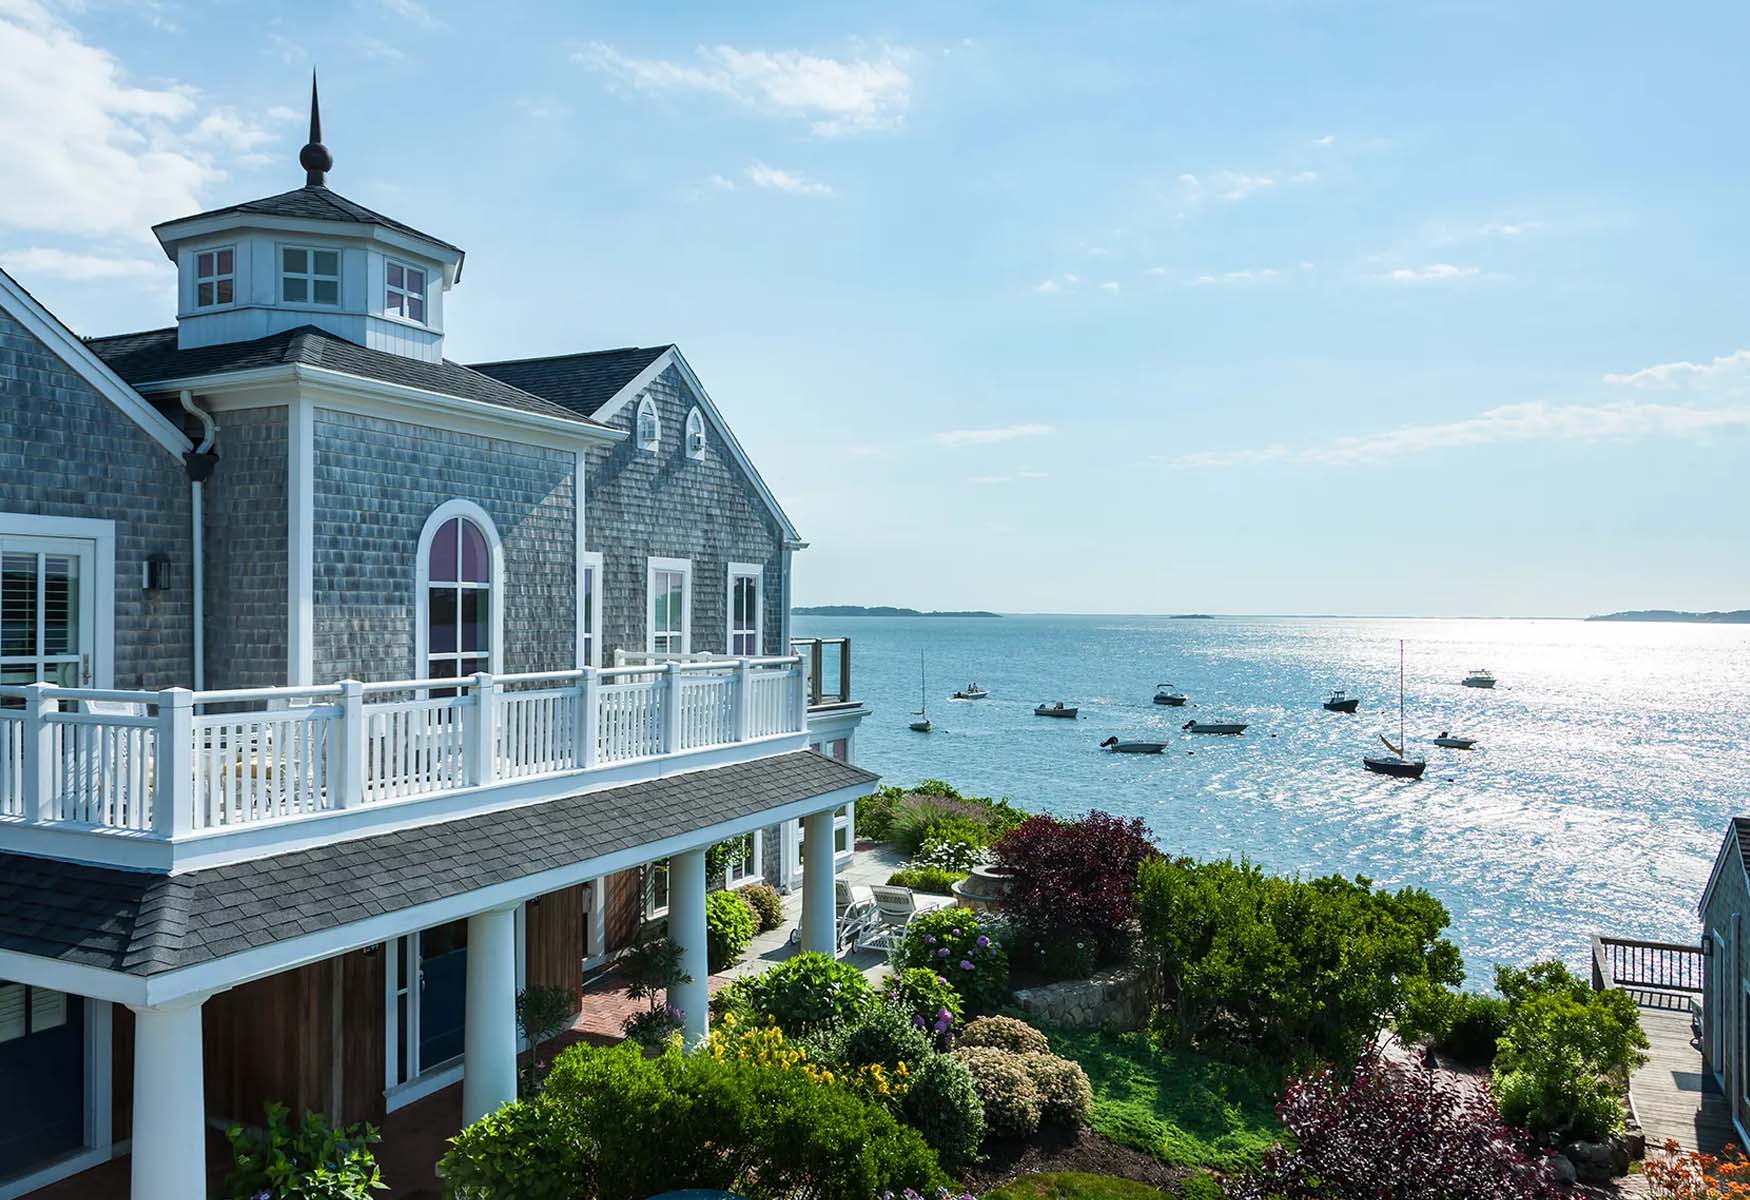 Where To Stay In Cape Cod: The BEST Areas